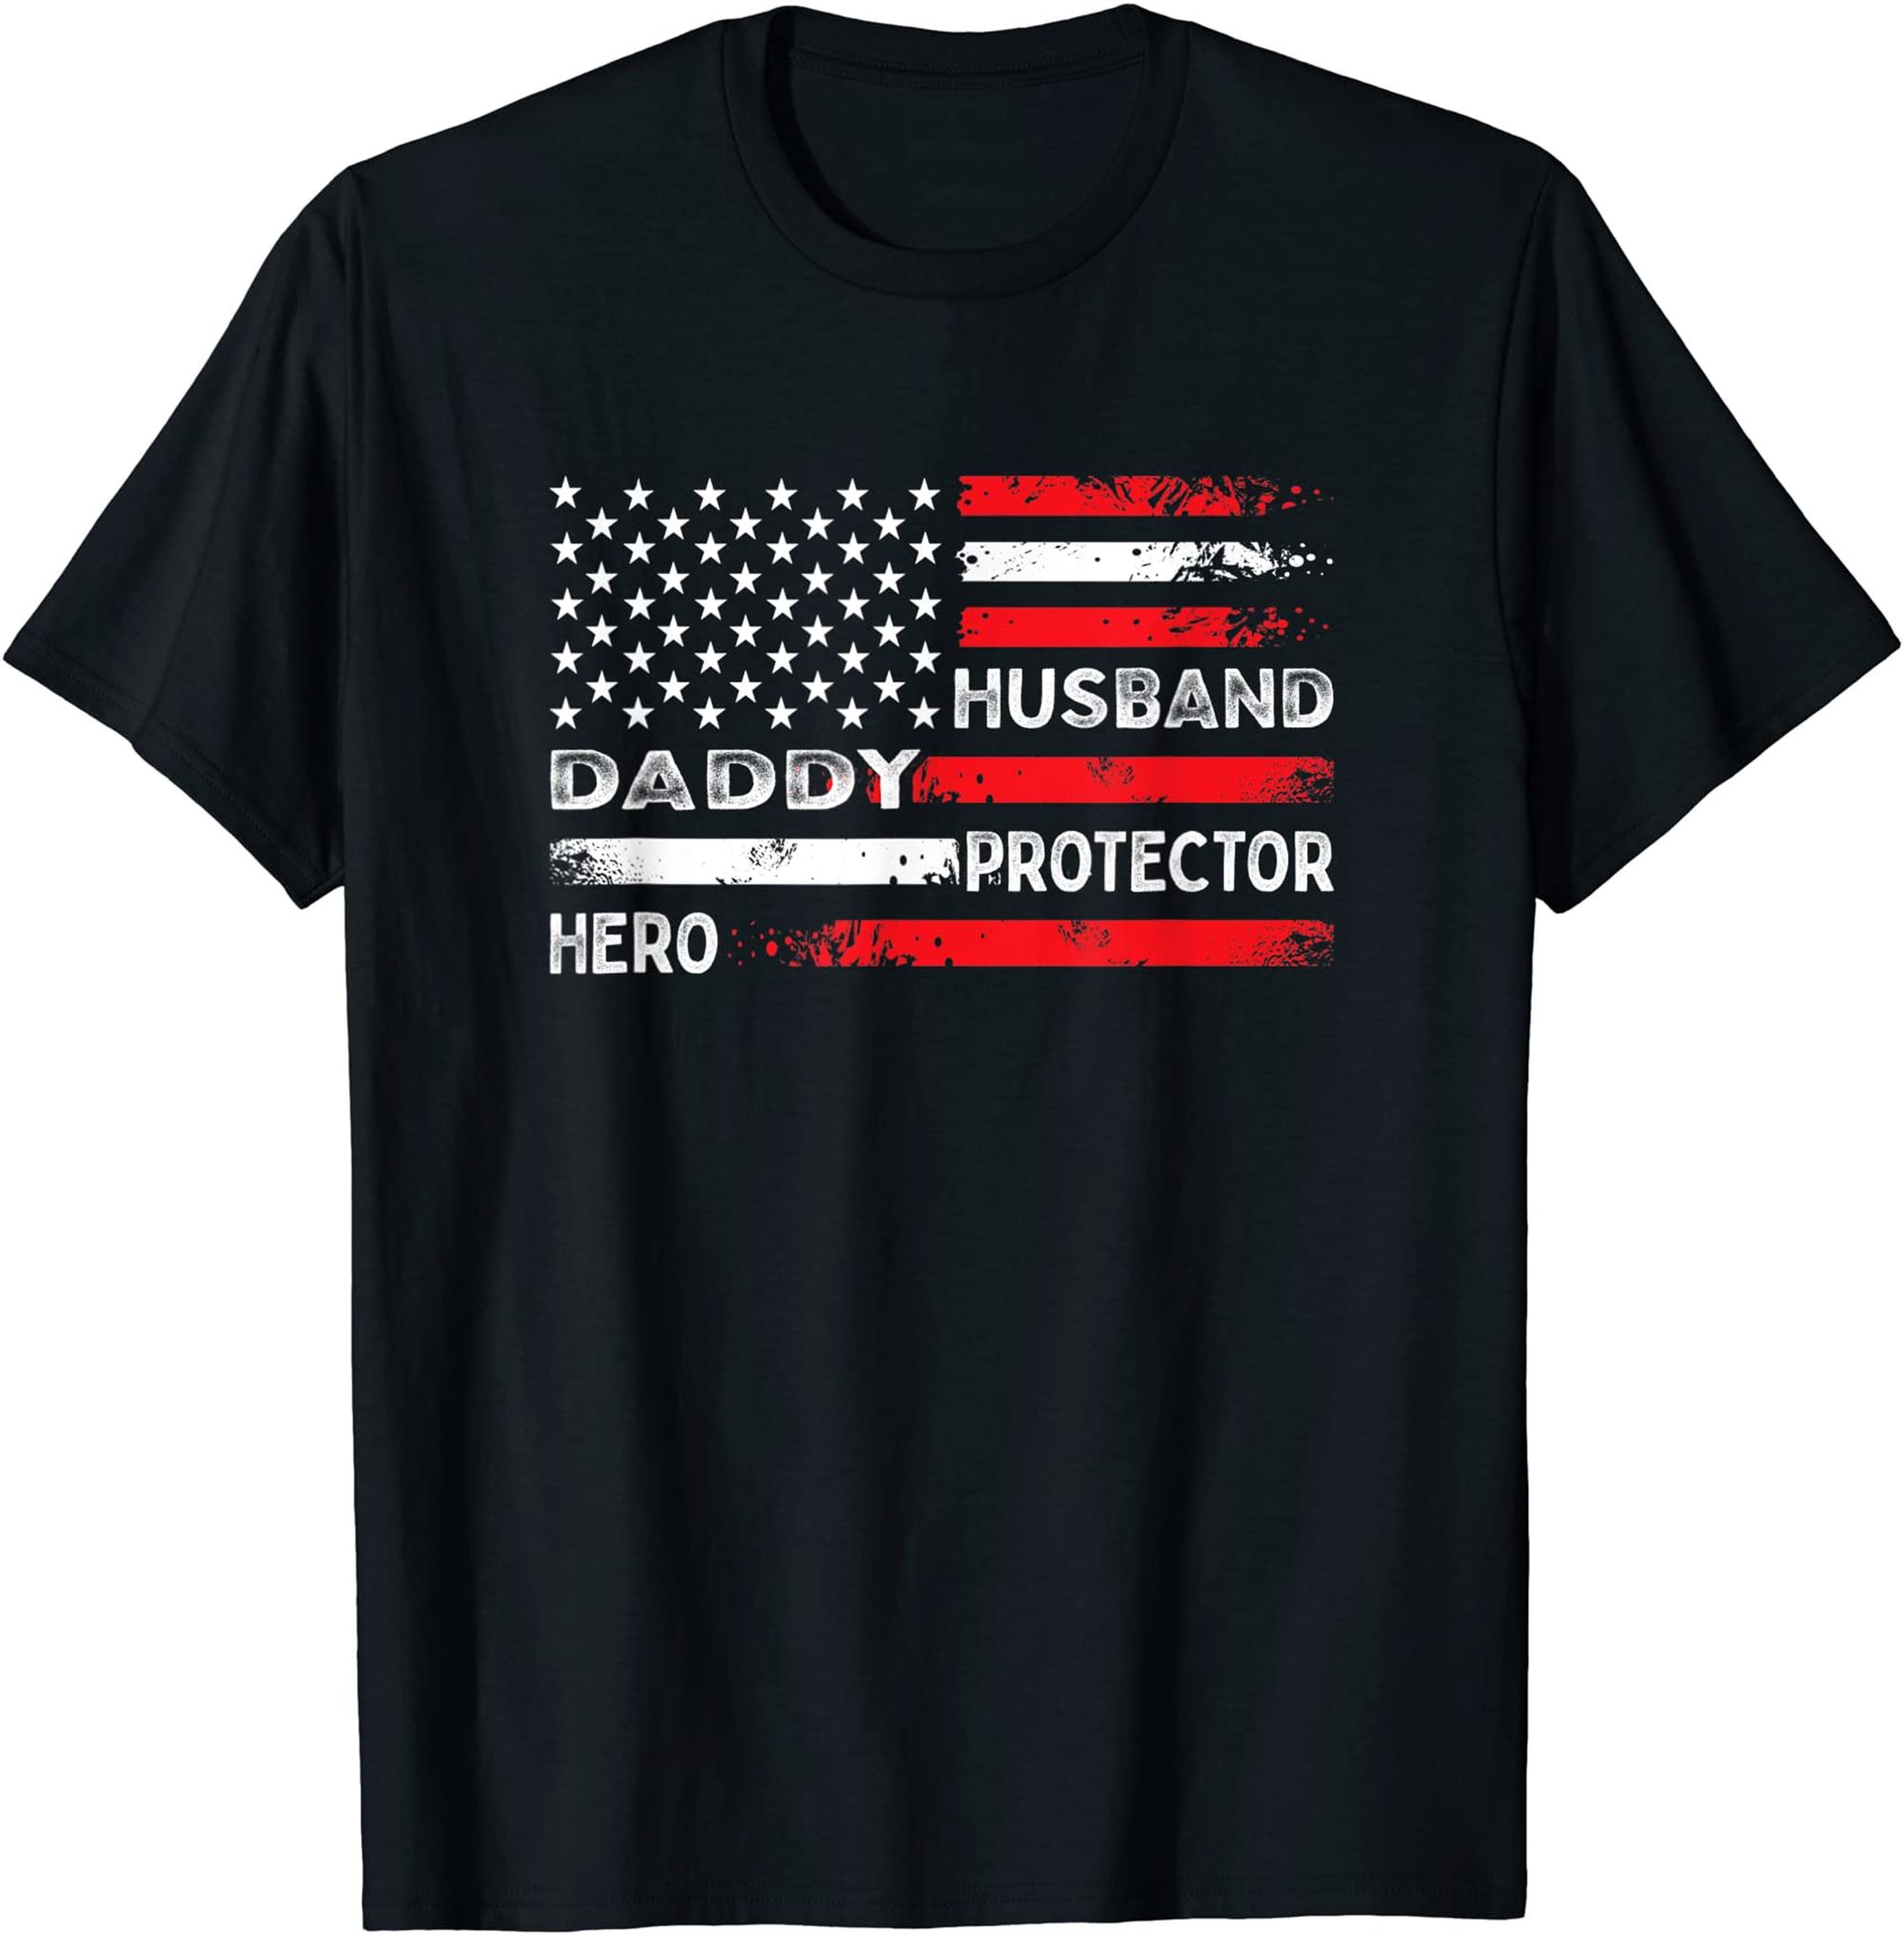 Husband Daddy Protector Hero Fathers Day American Flag T-shirt Size Up To 5xl